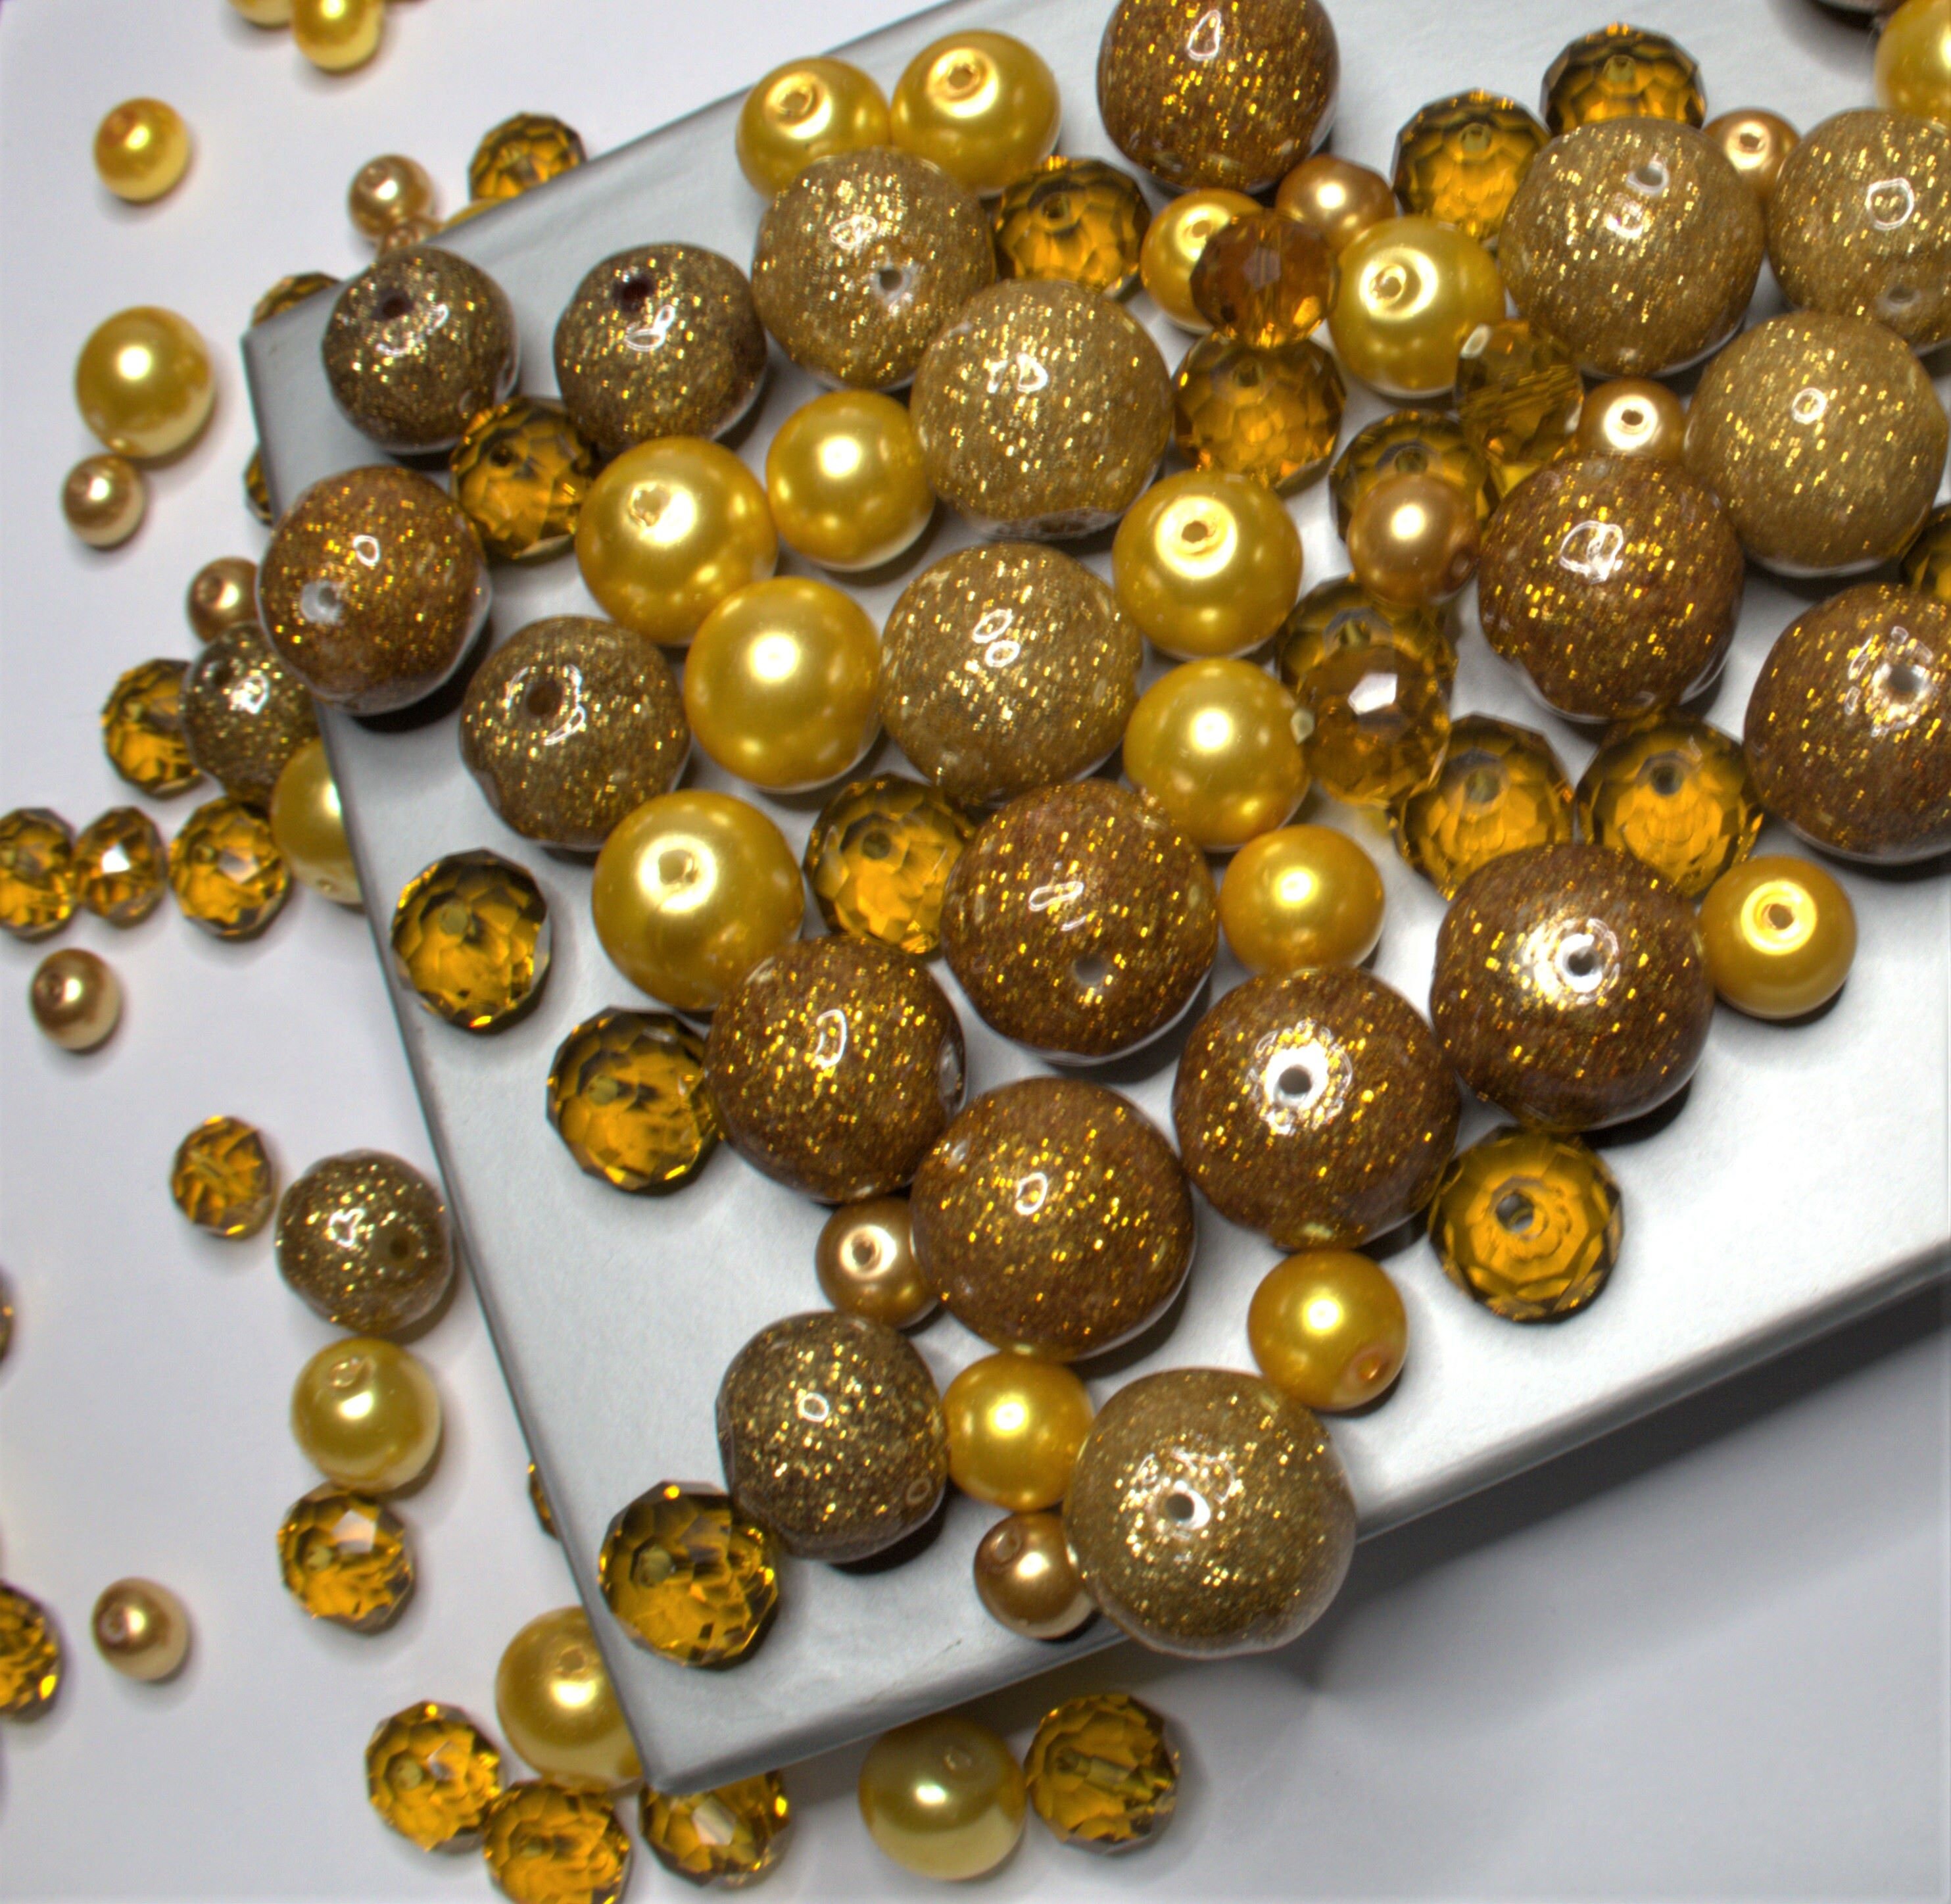 Bulk Beads for Jewelry Making 10 lb Mix Glass Beads Brown Yellow